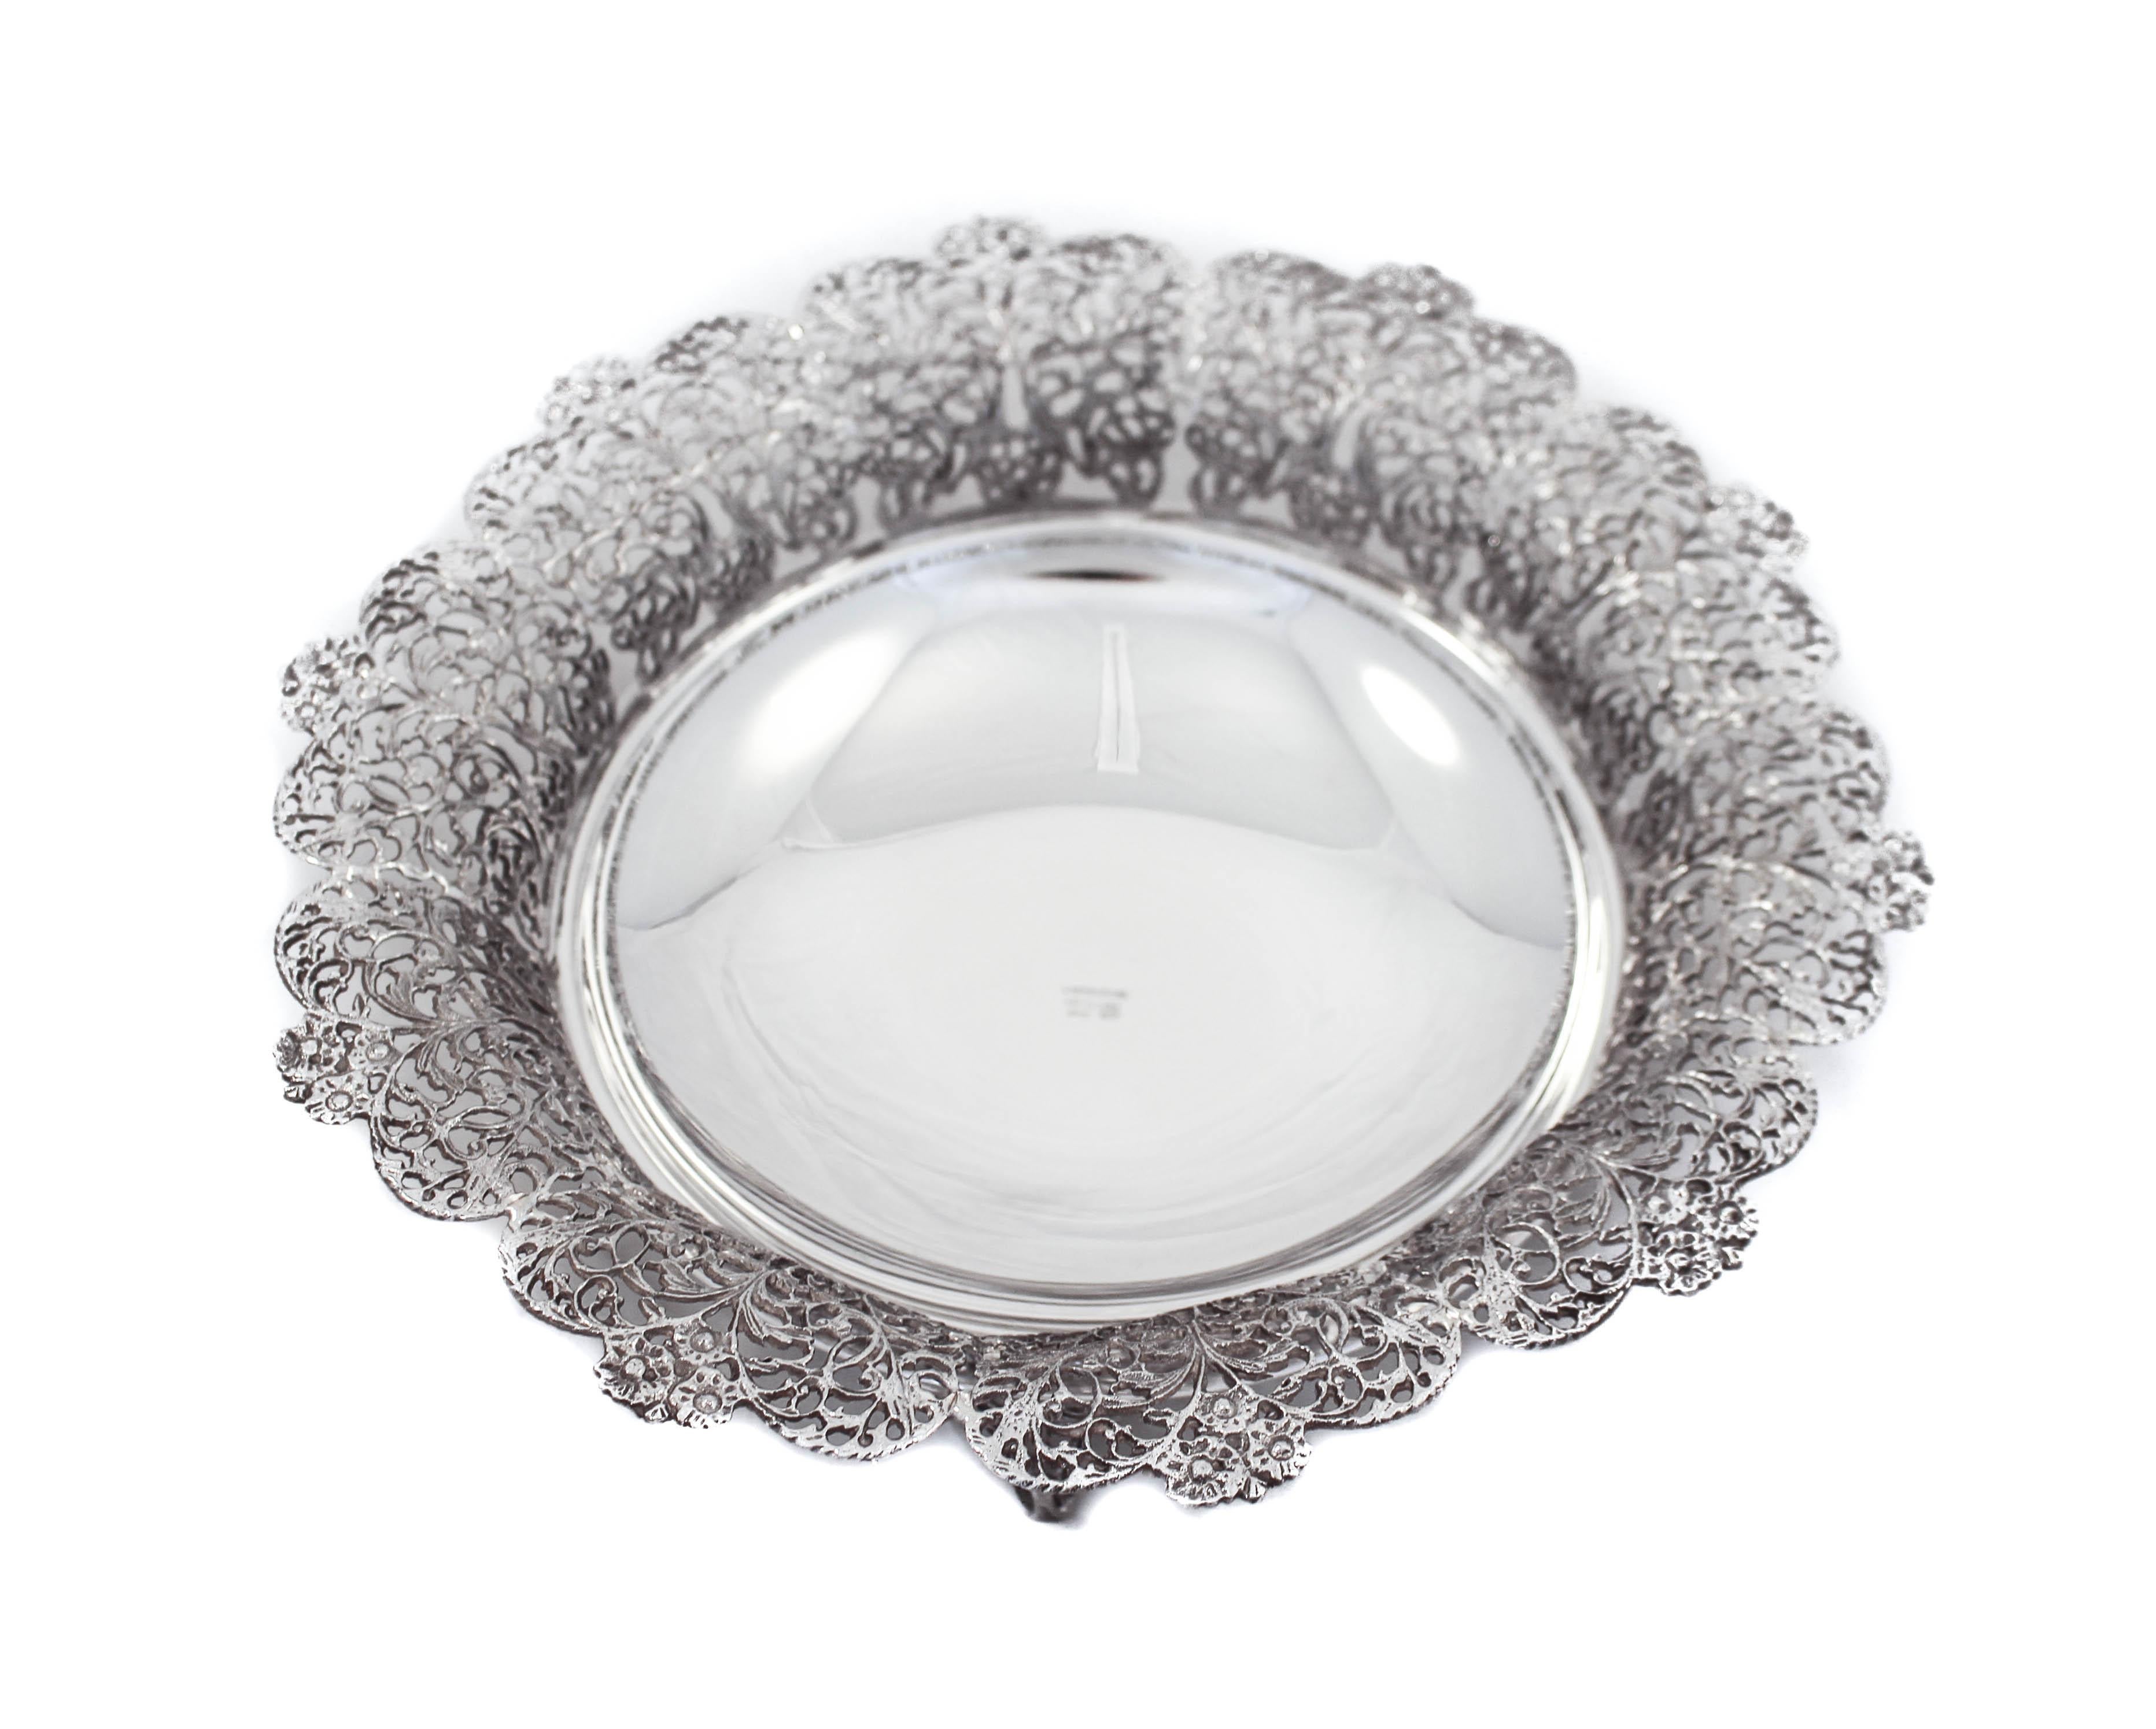 We are thrilled to offer you this pair of sterling silver Italian bowls from the 1970’s. We love pairs and hope you do too!! Each bowl stands on three-legs so it’s propping off the surface. They are reticulated and have a scalloped rim. While the